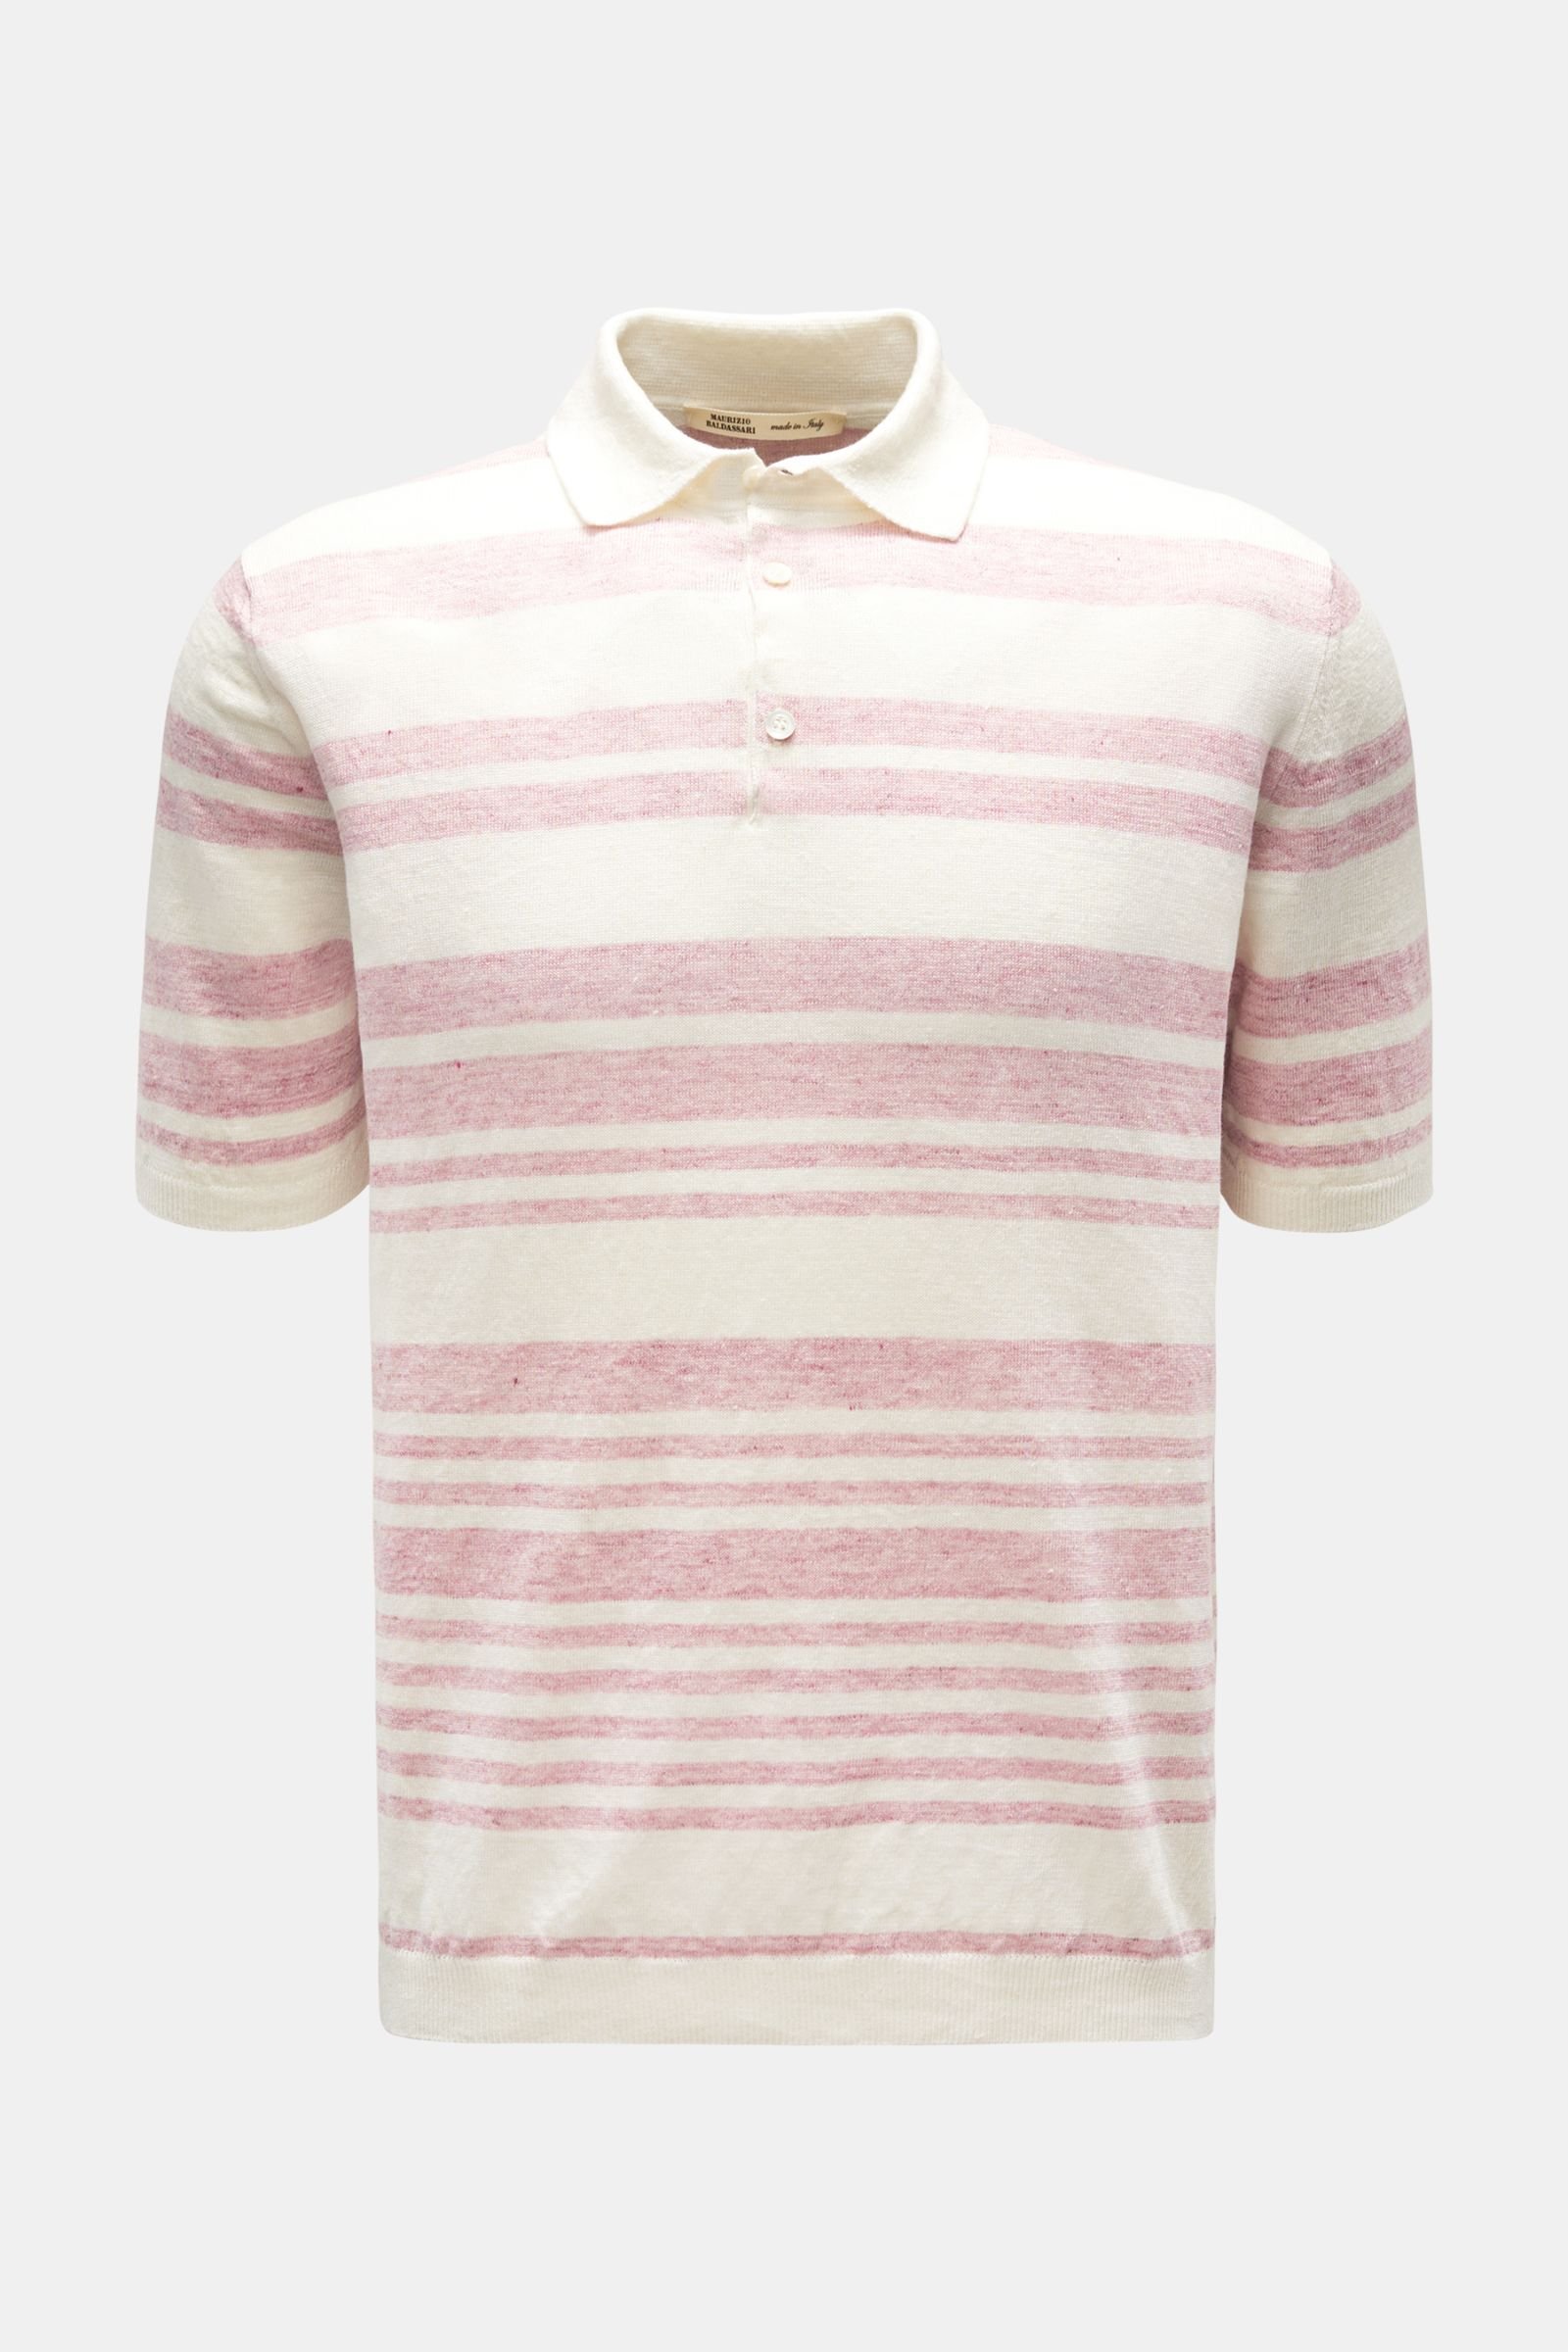 Linen short sleeve knit polo antique pink/white striped